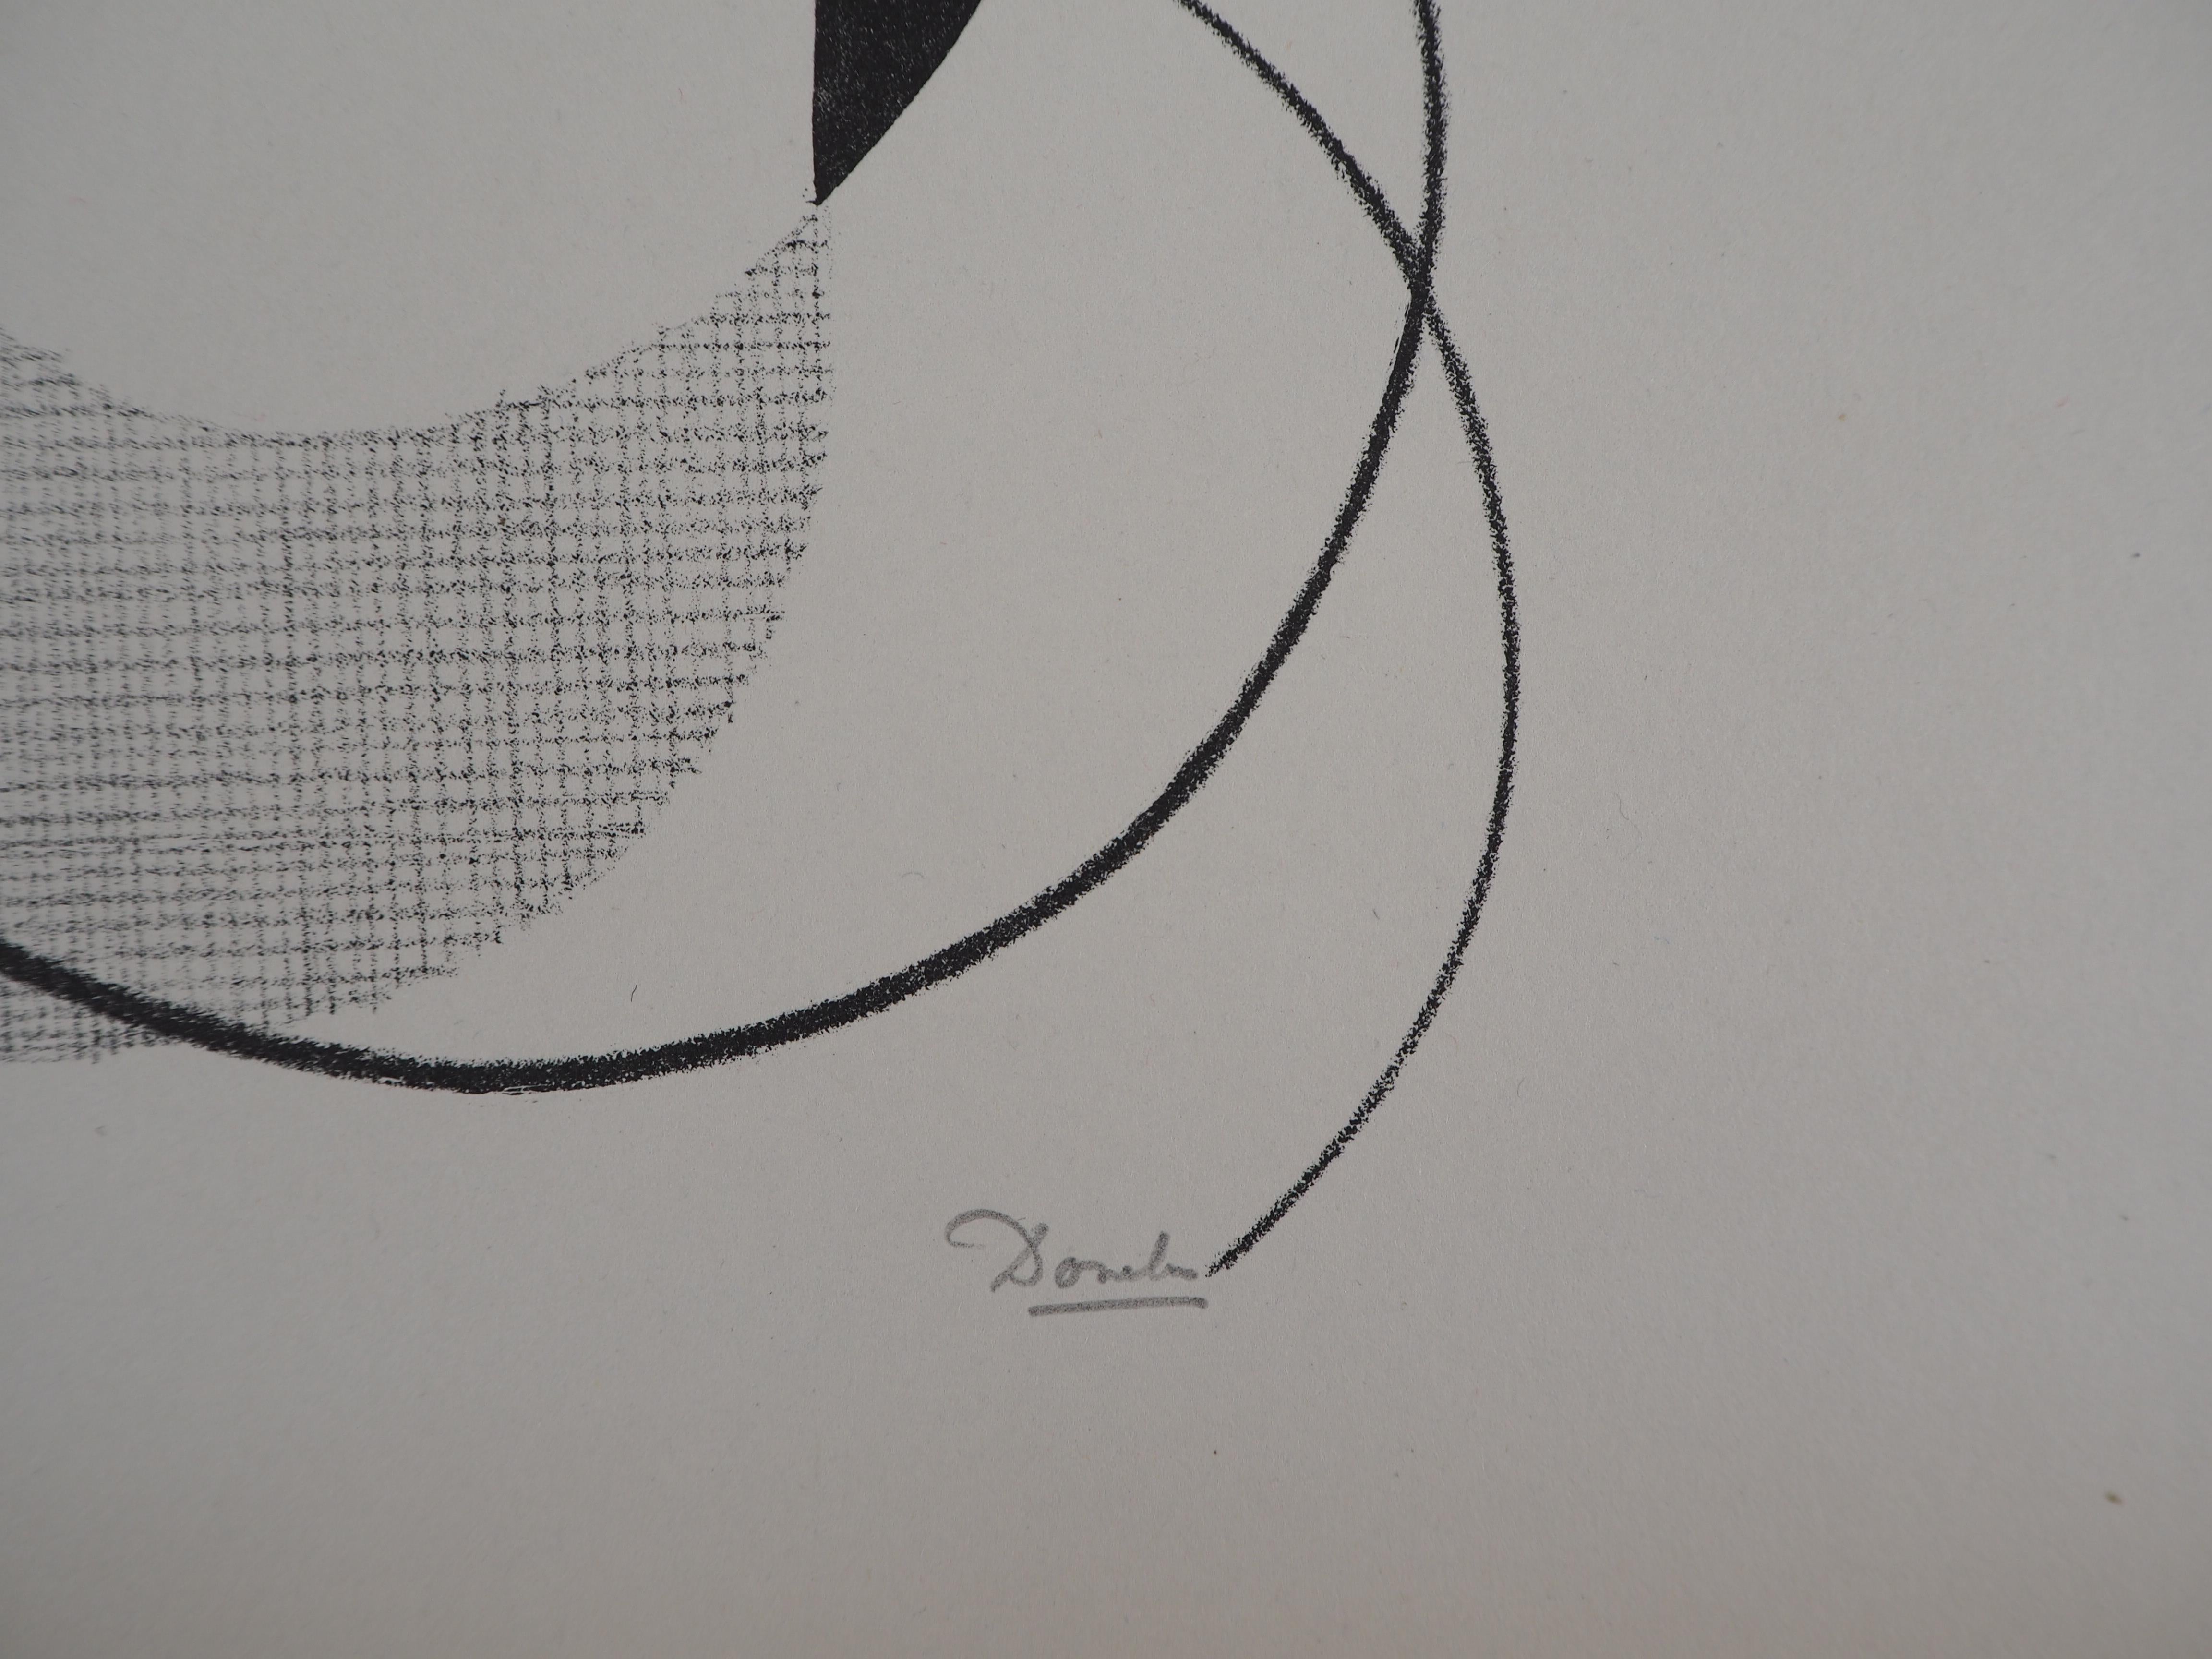 Abstract Composition - Original lithograph, Handsigned and Numbered / 100, 1946 - Print by César Domela